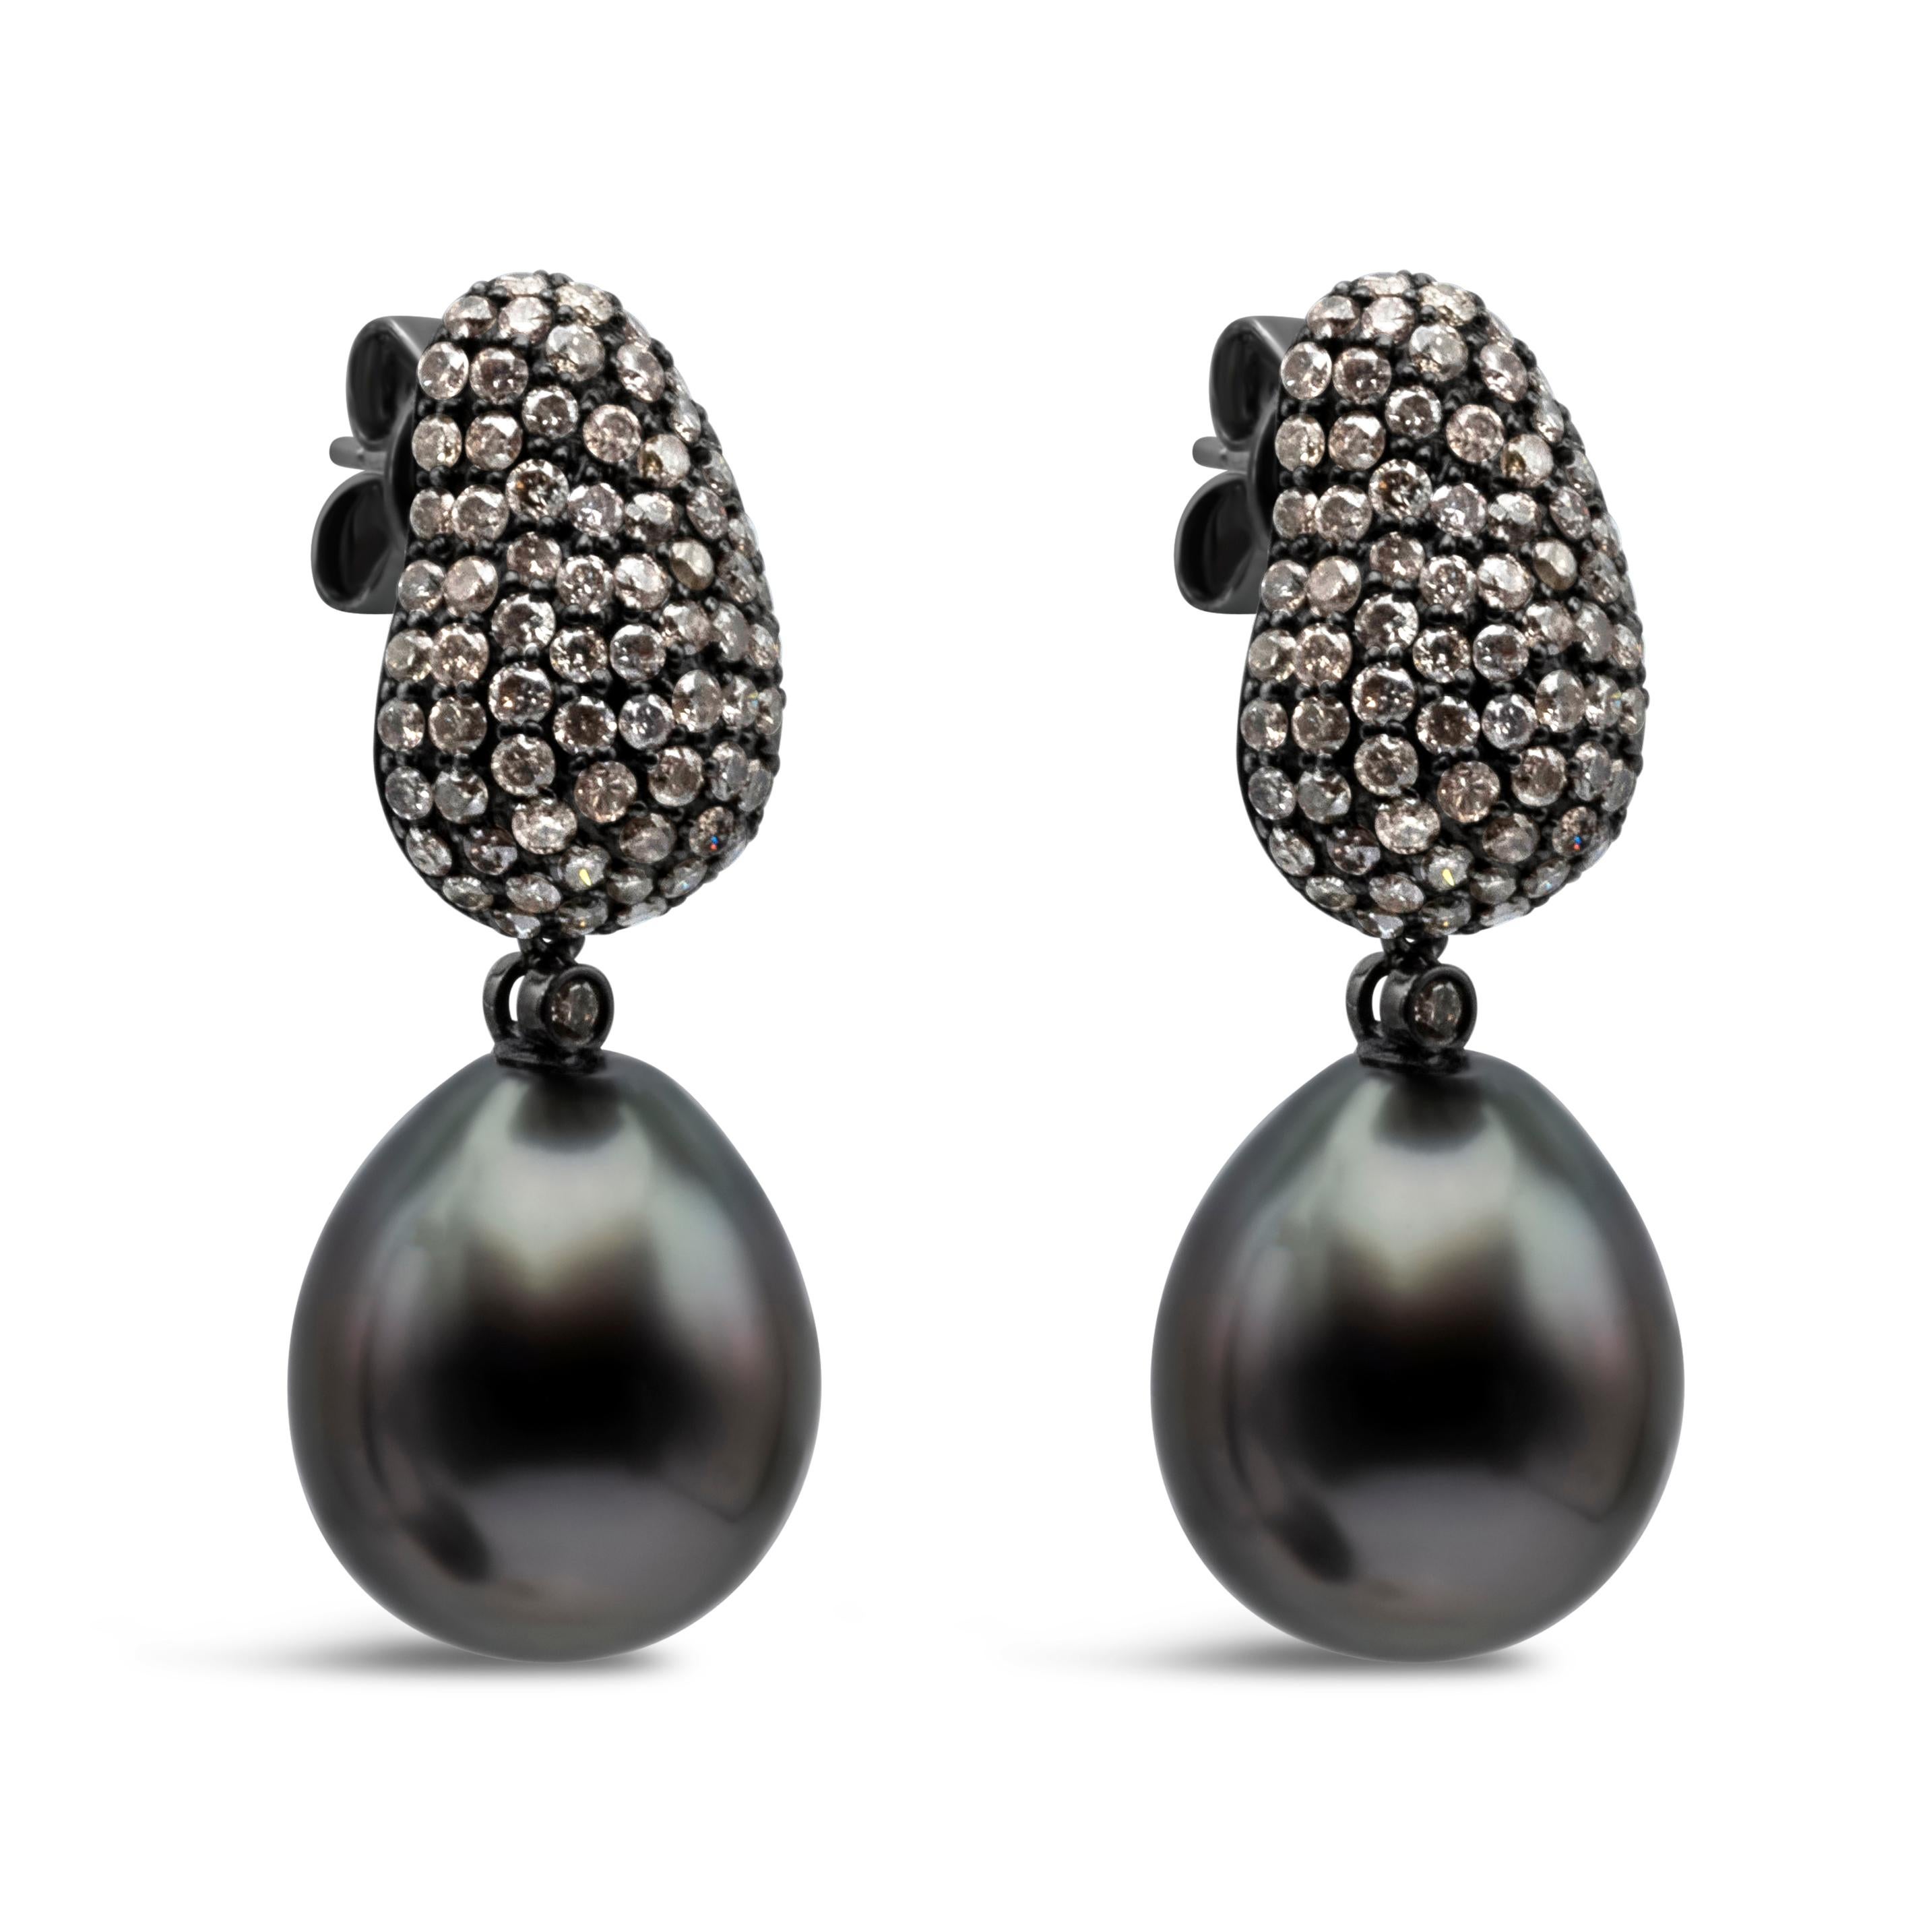 This elegant and stylish drop earrings feature 12-13 mm Tahitian Black pearls. This earrings has 184 round cut champagne diamonds weighing 2.65 carats total, pave set in a tear drop design. Pearl is suspended on a bezel set diamond. Made in 18K